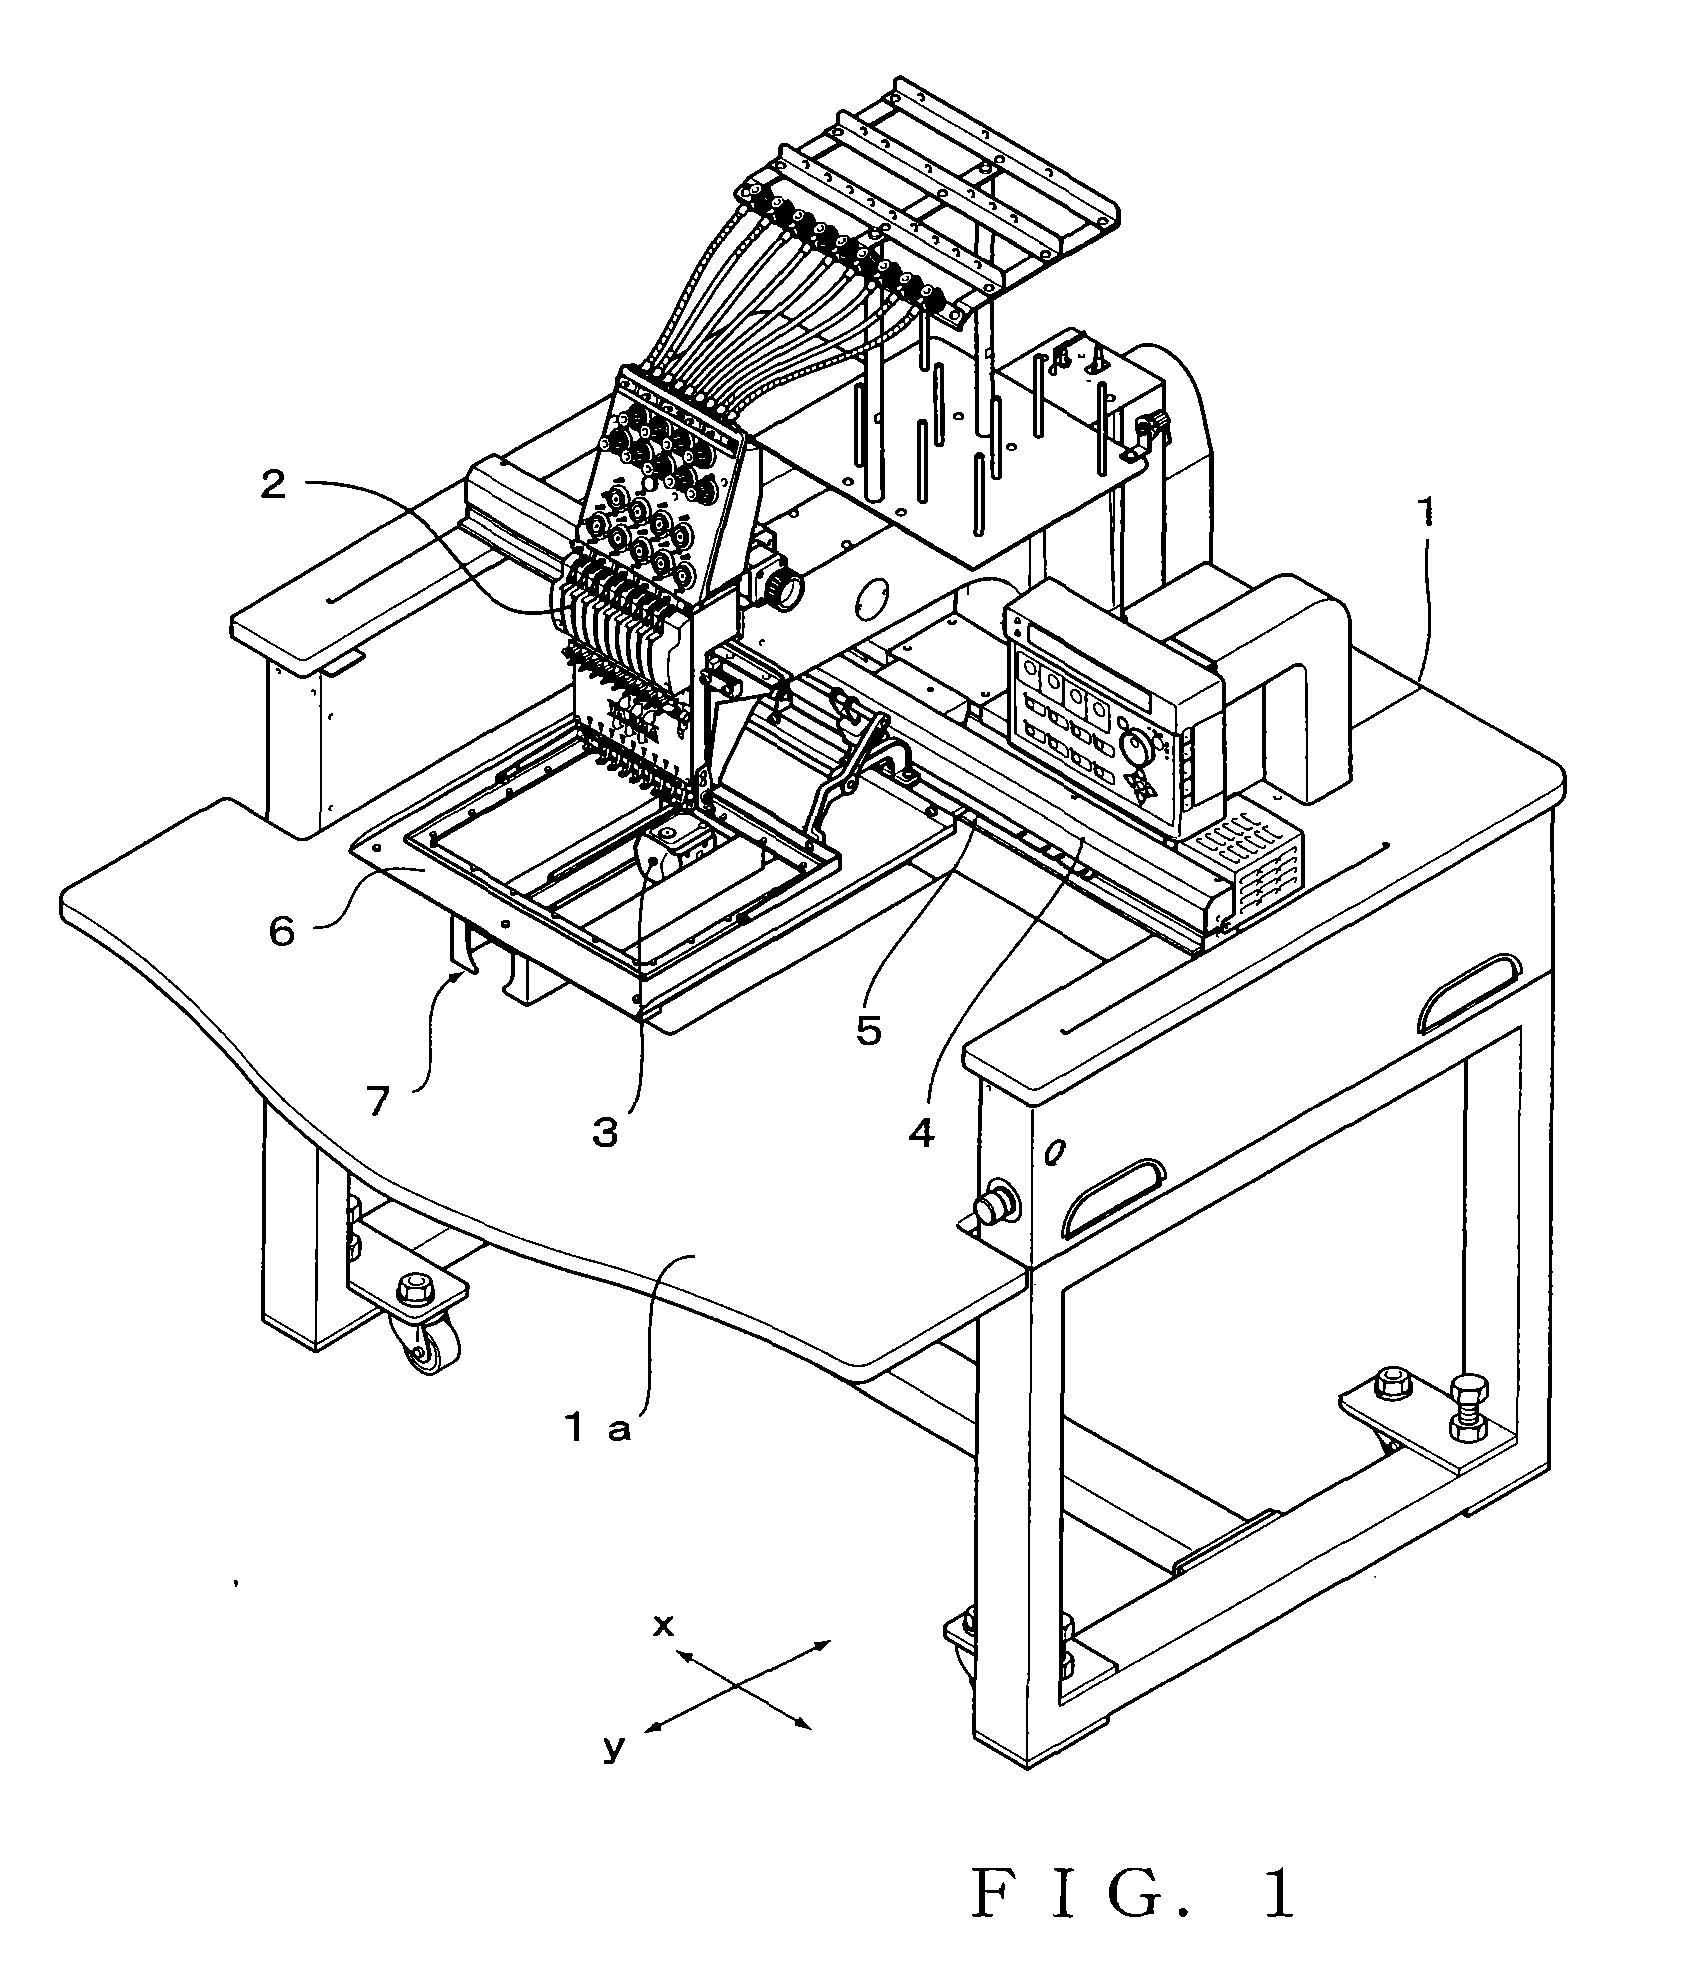 Embroidery frame support device